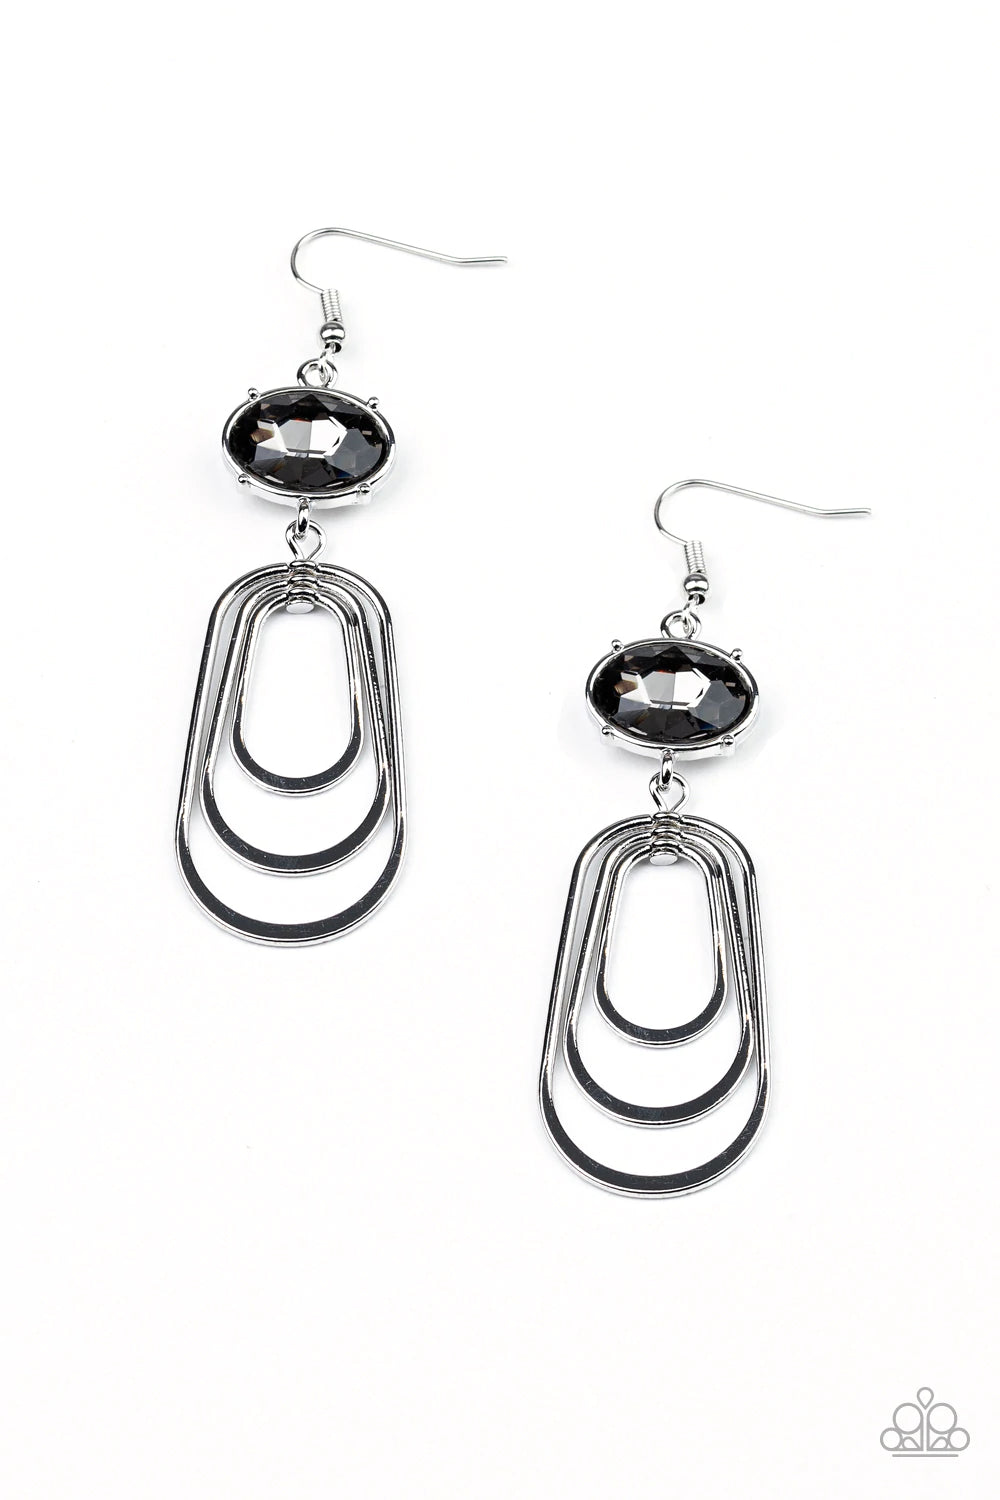 Paparazzi Accessories Drop-Dead Glamorous - Silver Oval shaped silver frames drip from the bottom of an oversized smoky rhinestone gem, creating a rippling fringe. Earring attaches to a standard fishhook fitting. Sold as one pair of earrings. Jewelry